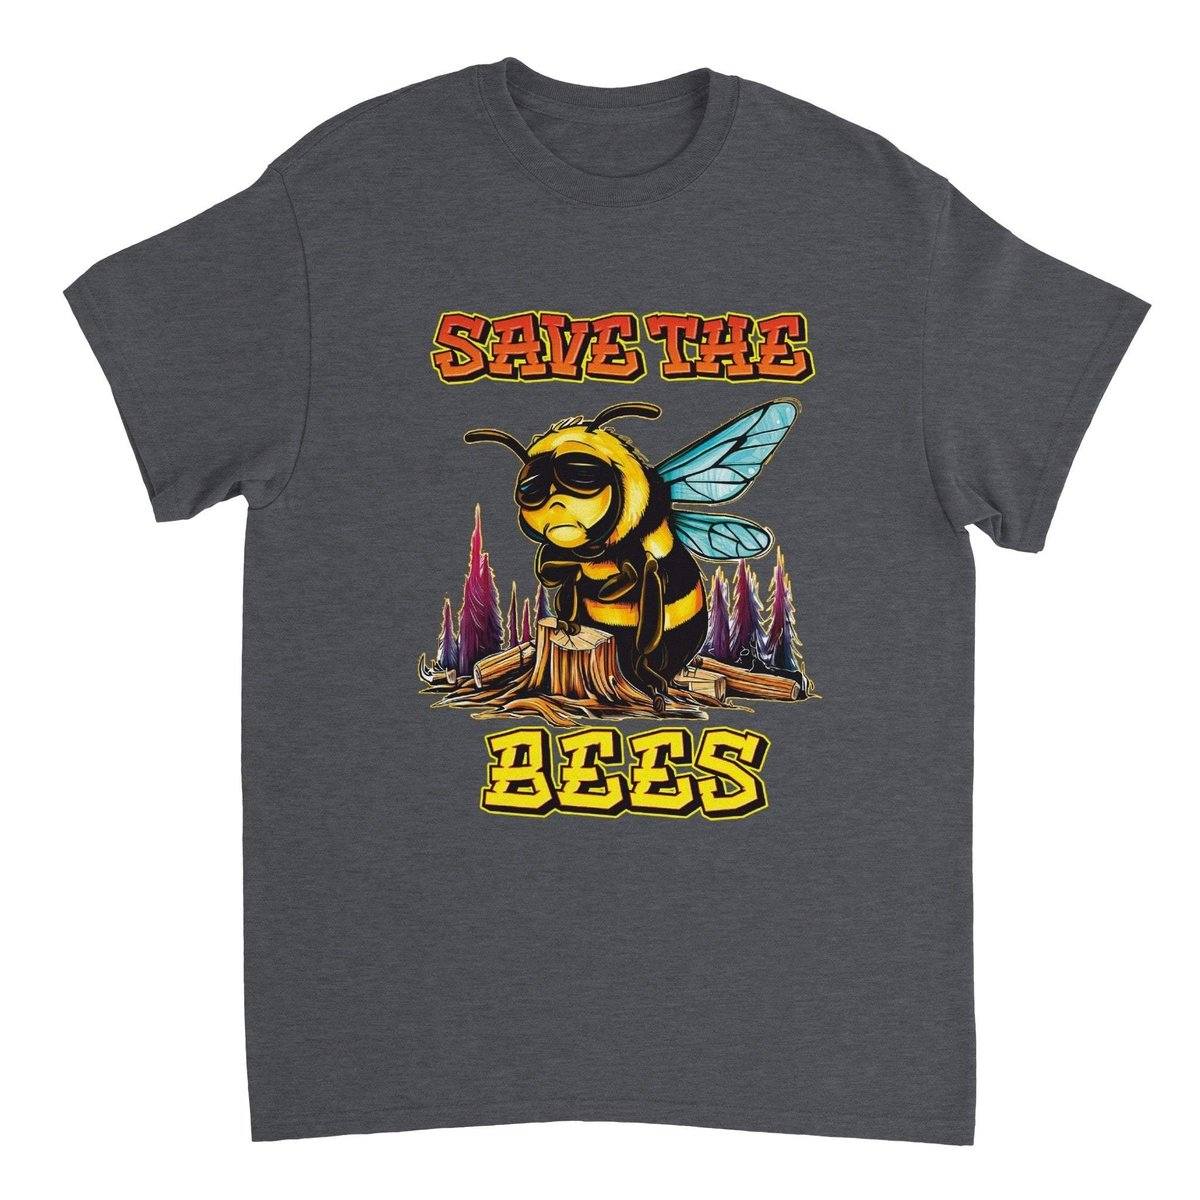 Save The Bees Tshirt - Crying Bee - Unisex Crewneck T-shirt Australia Online Color